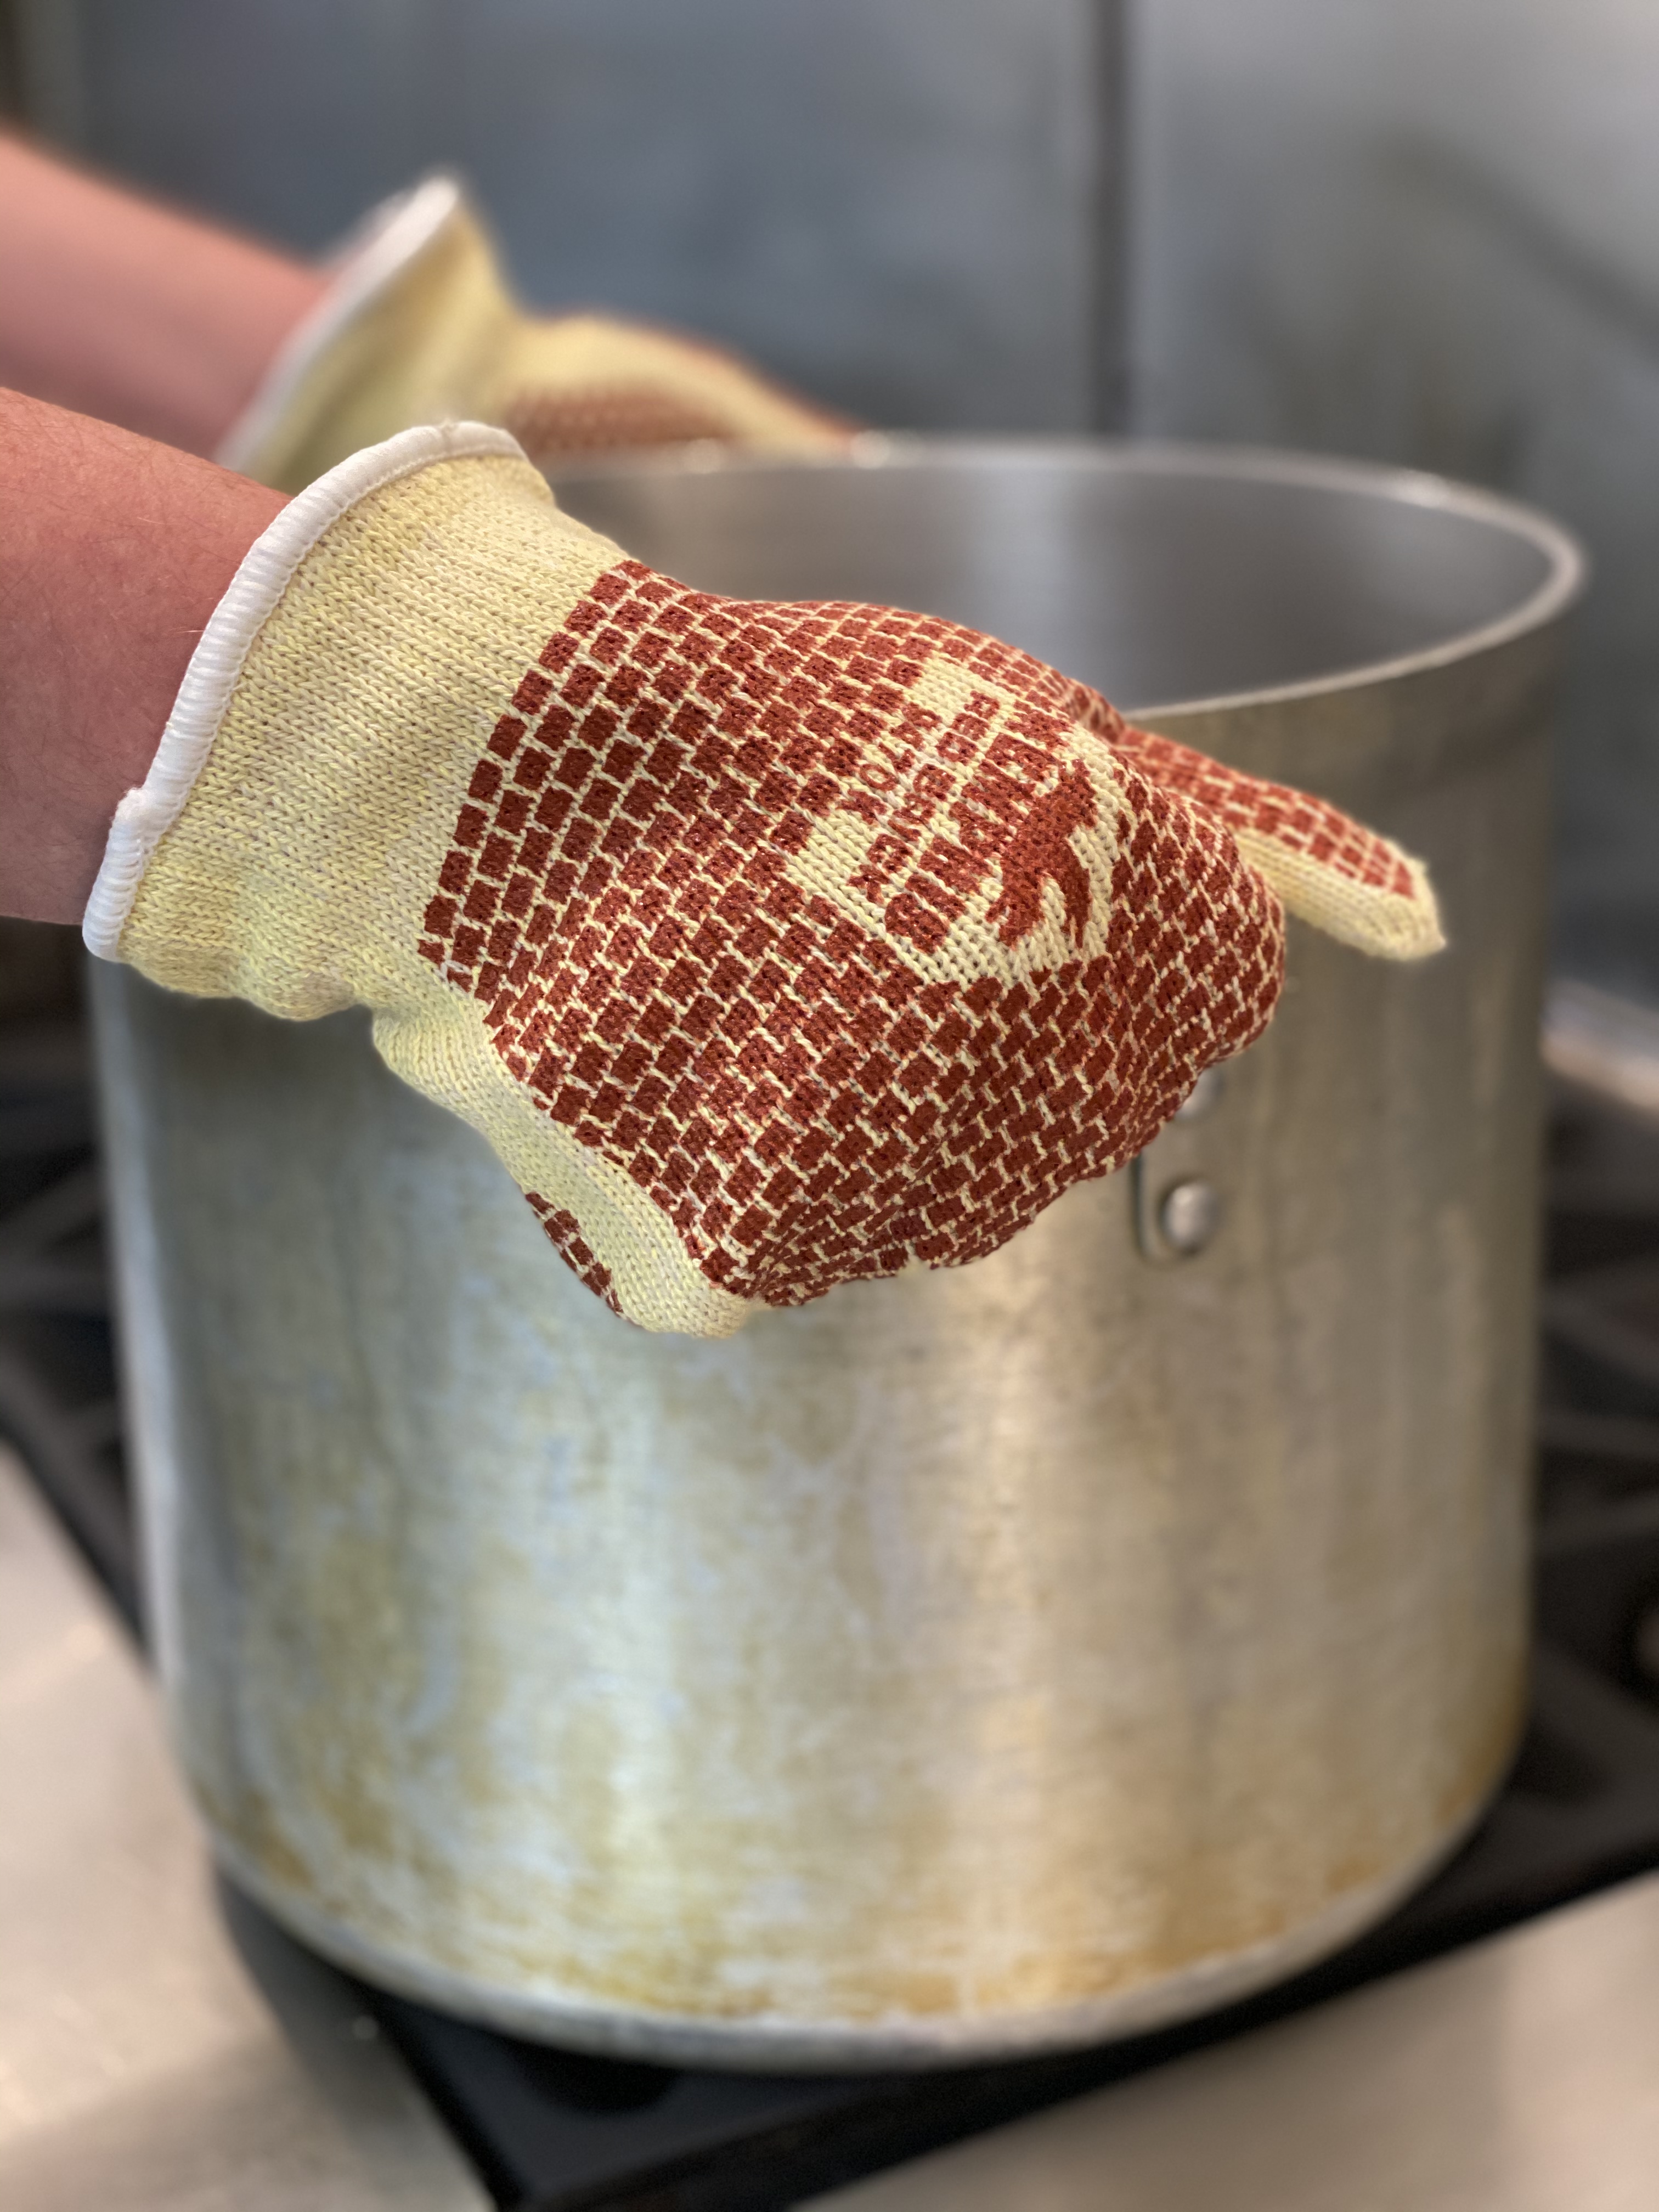 Hot Gloves - Heat Resistant Cooking Gloves